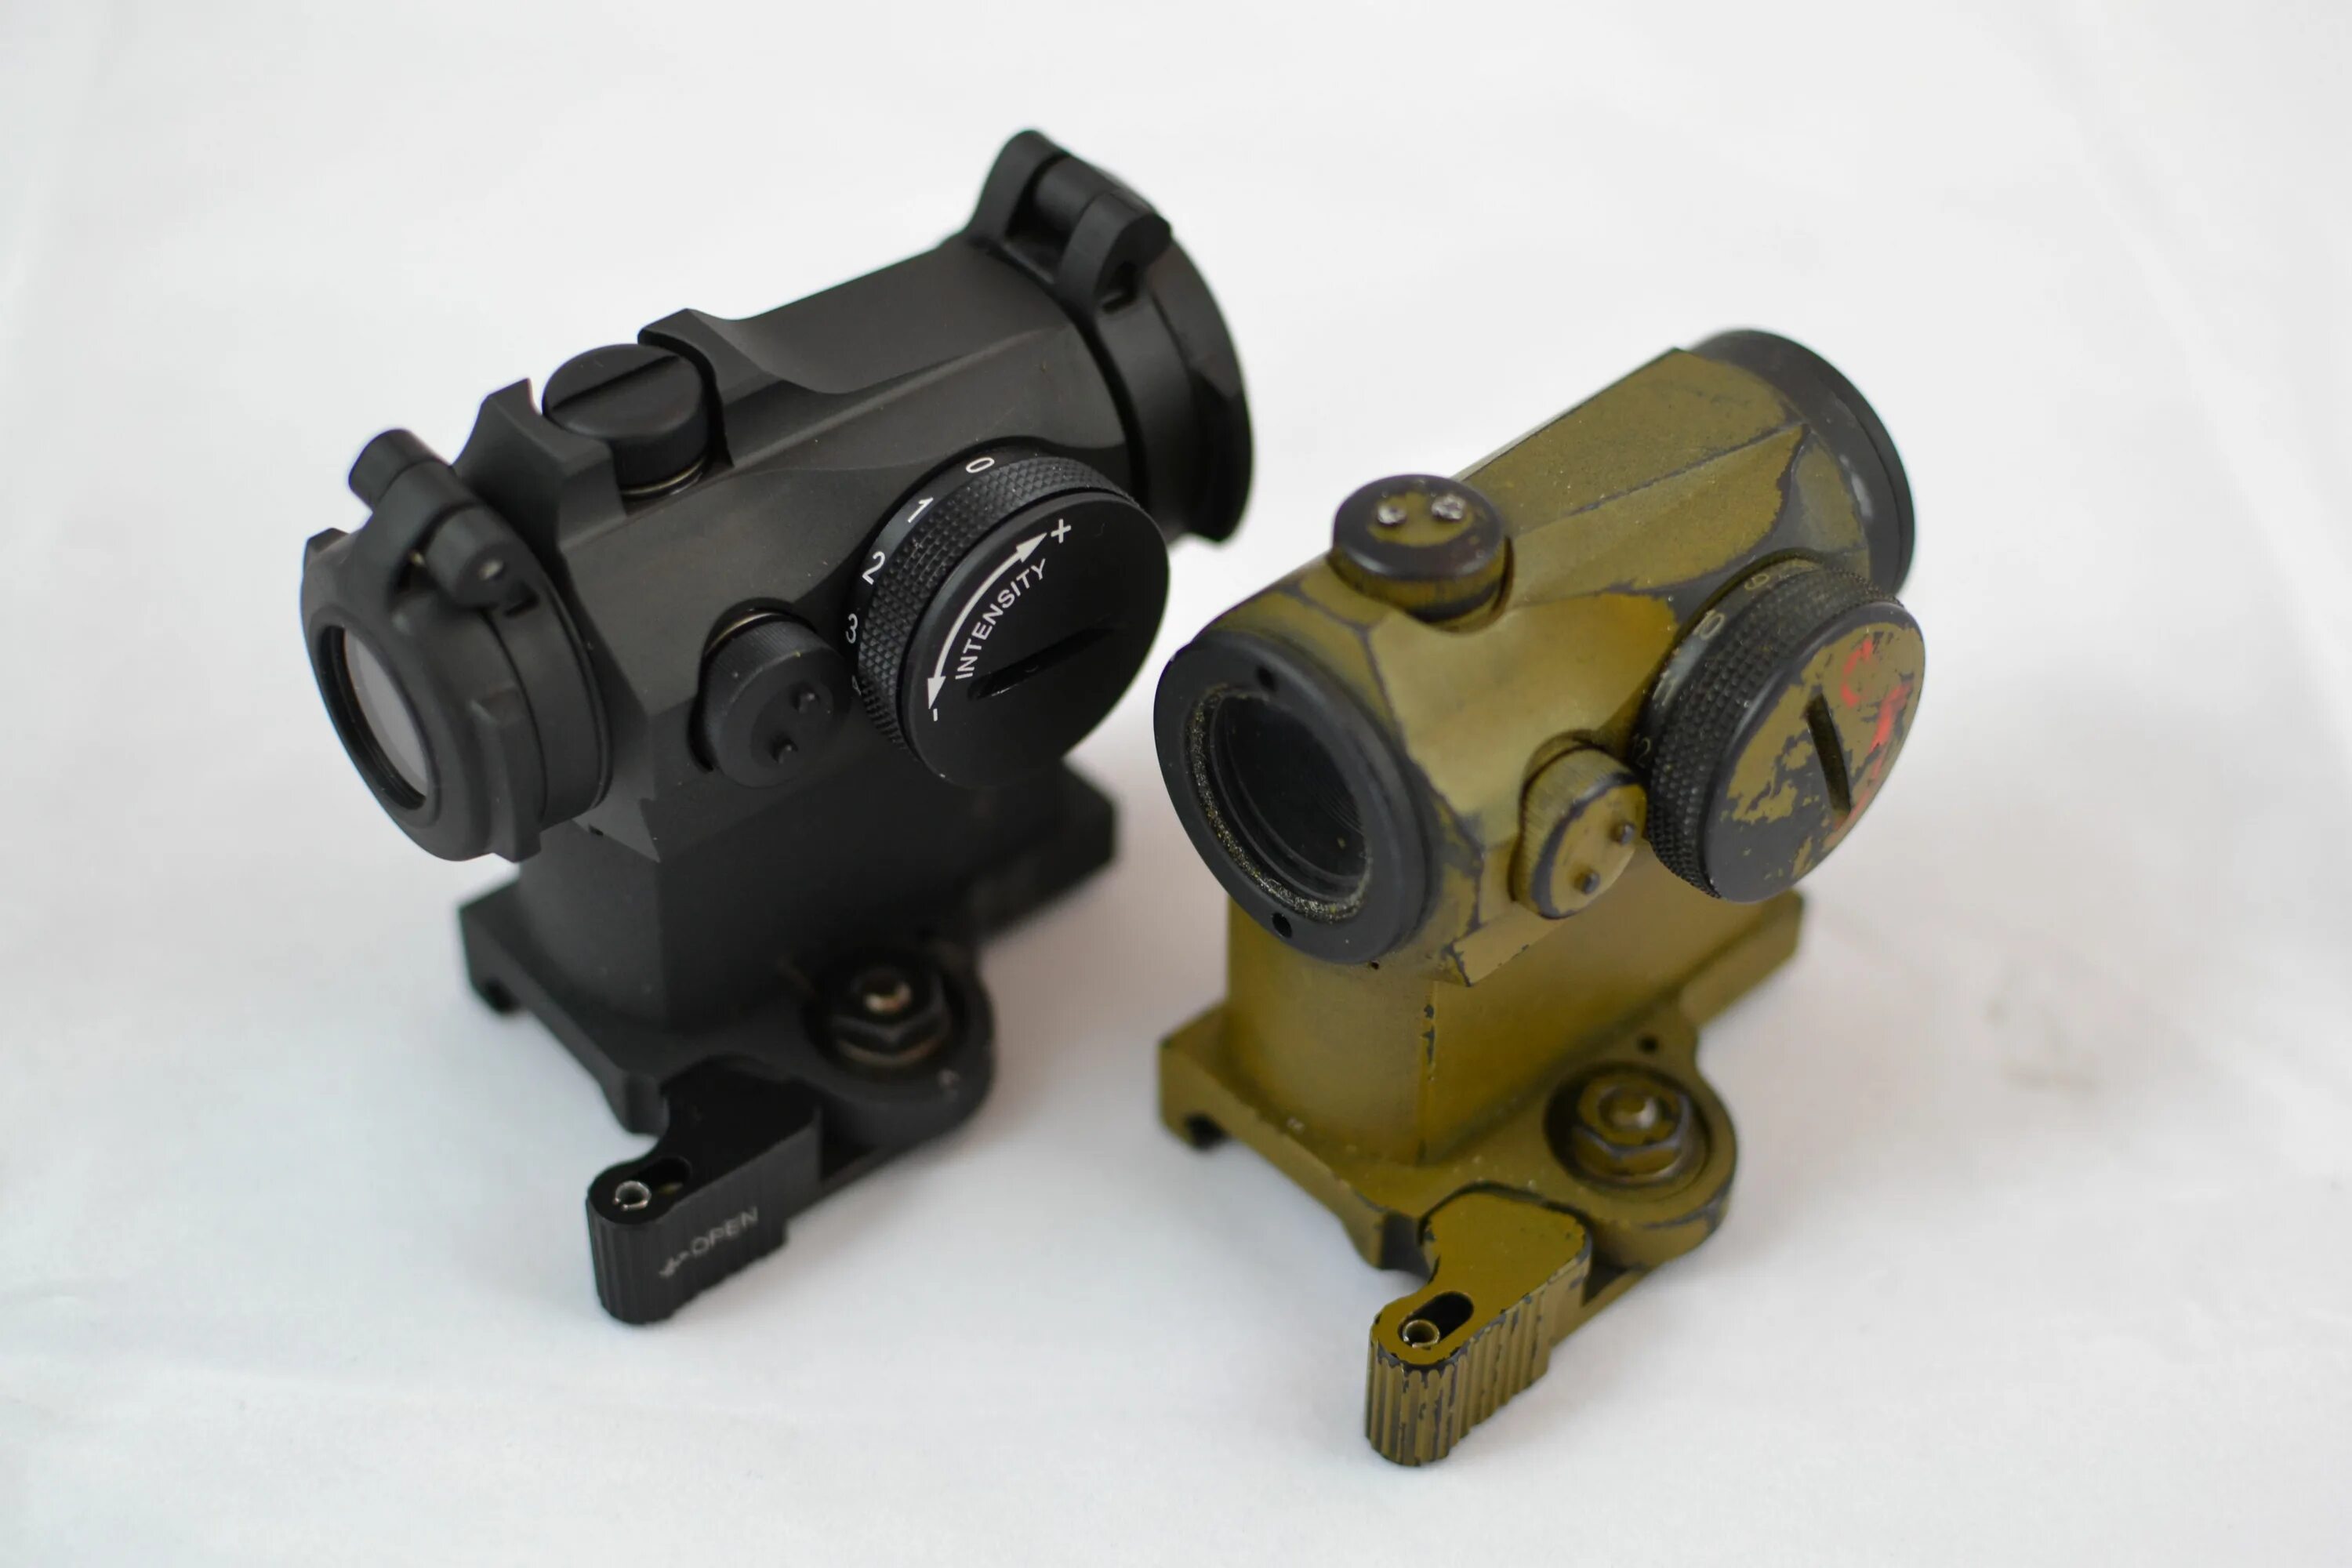 Микро т. Aimpoint Micro t-1. «Aimpoint Micro т-1». Aimpoint Micro t-2. Коллиматор Aimpoint t1.